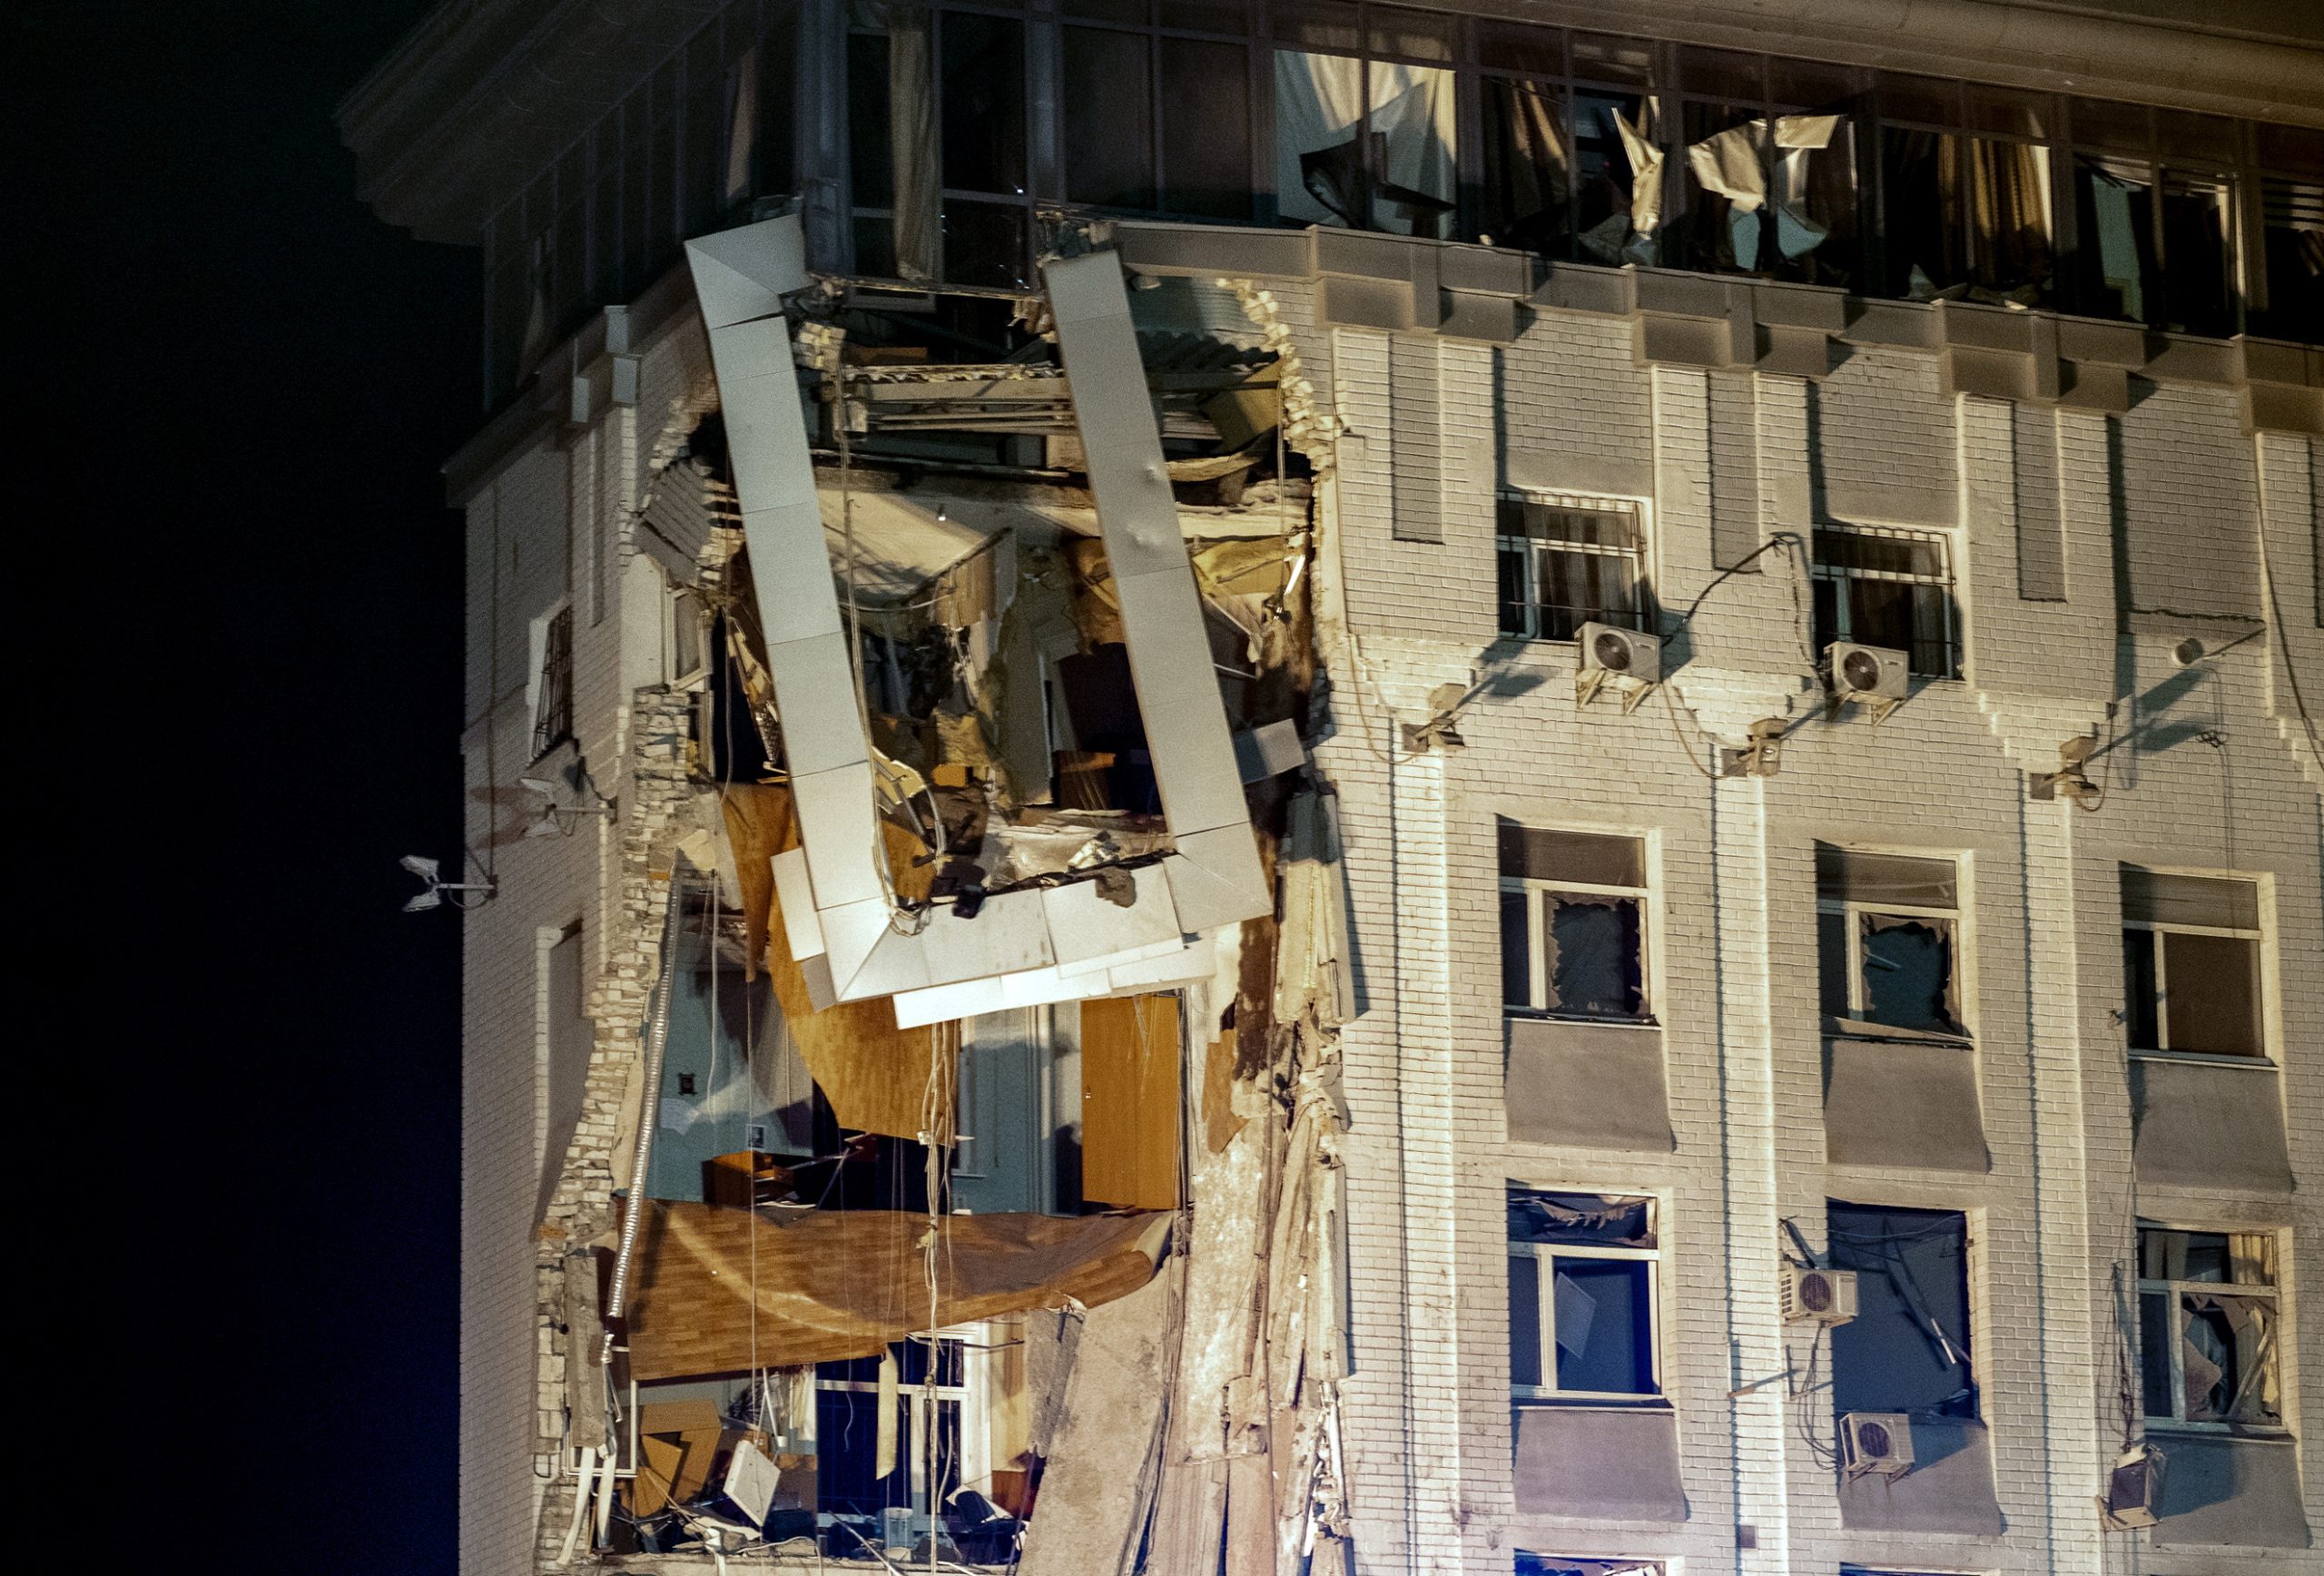 epa10774459 A damaged administrative building after shelling in Dnipro, central Ukraine, 28 July 2023, amid the Russian invasion. A high-rise newly-erected residential building and administrative building were damaged in shelling. At least 9 people injured, including two children, as a result of a Russian attack on the city of Dnipro, the Regional State Administration reported. Russian troops entered Ukrainian territory in February 2022, starting a conflict that has provoked destruction and a humanitarian crisis.  EPA/ARSEN DZODZAIEV